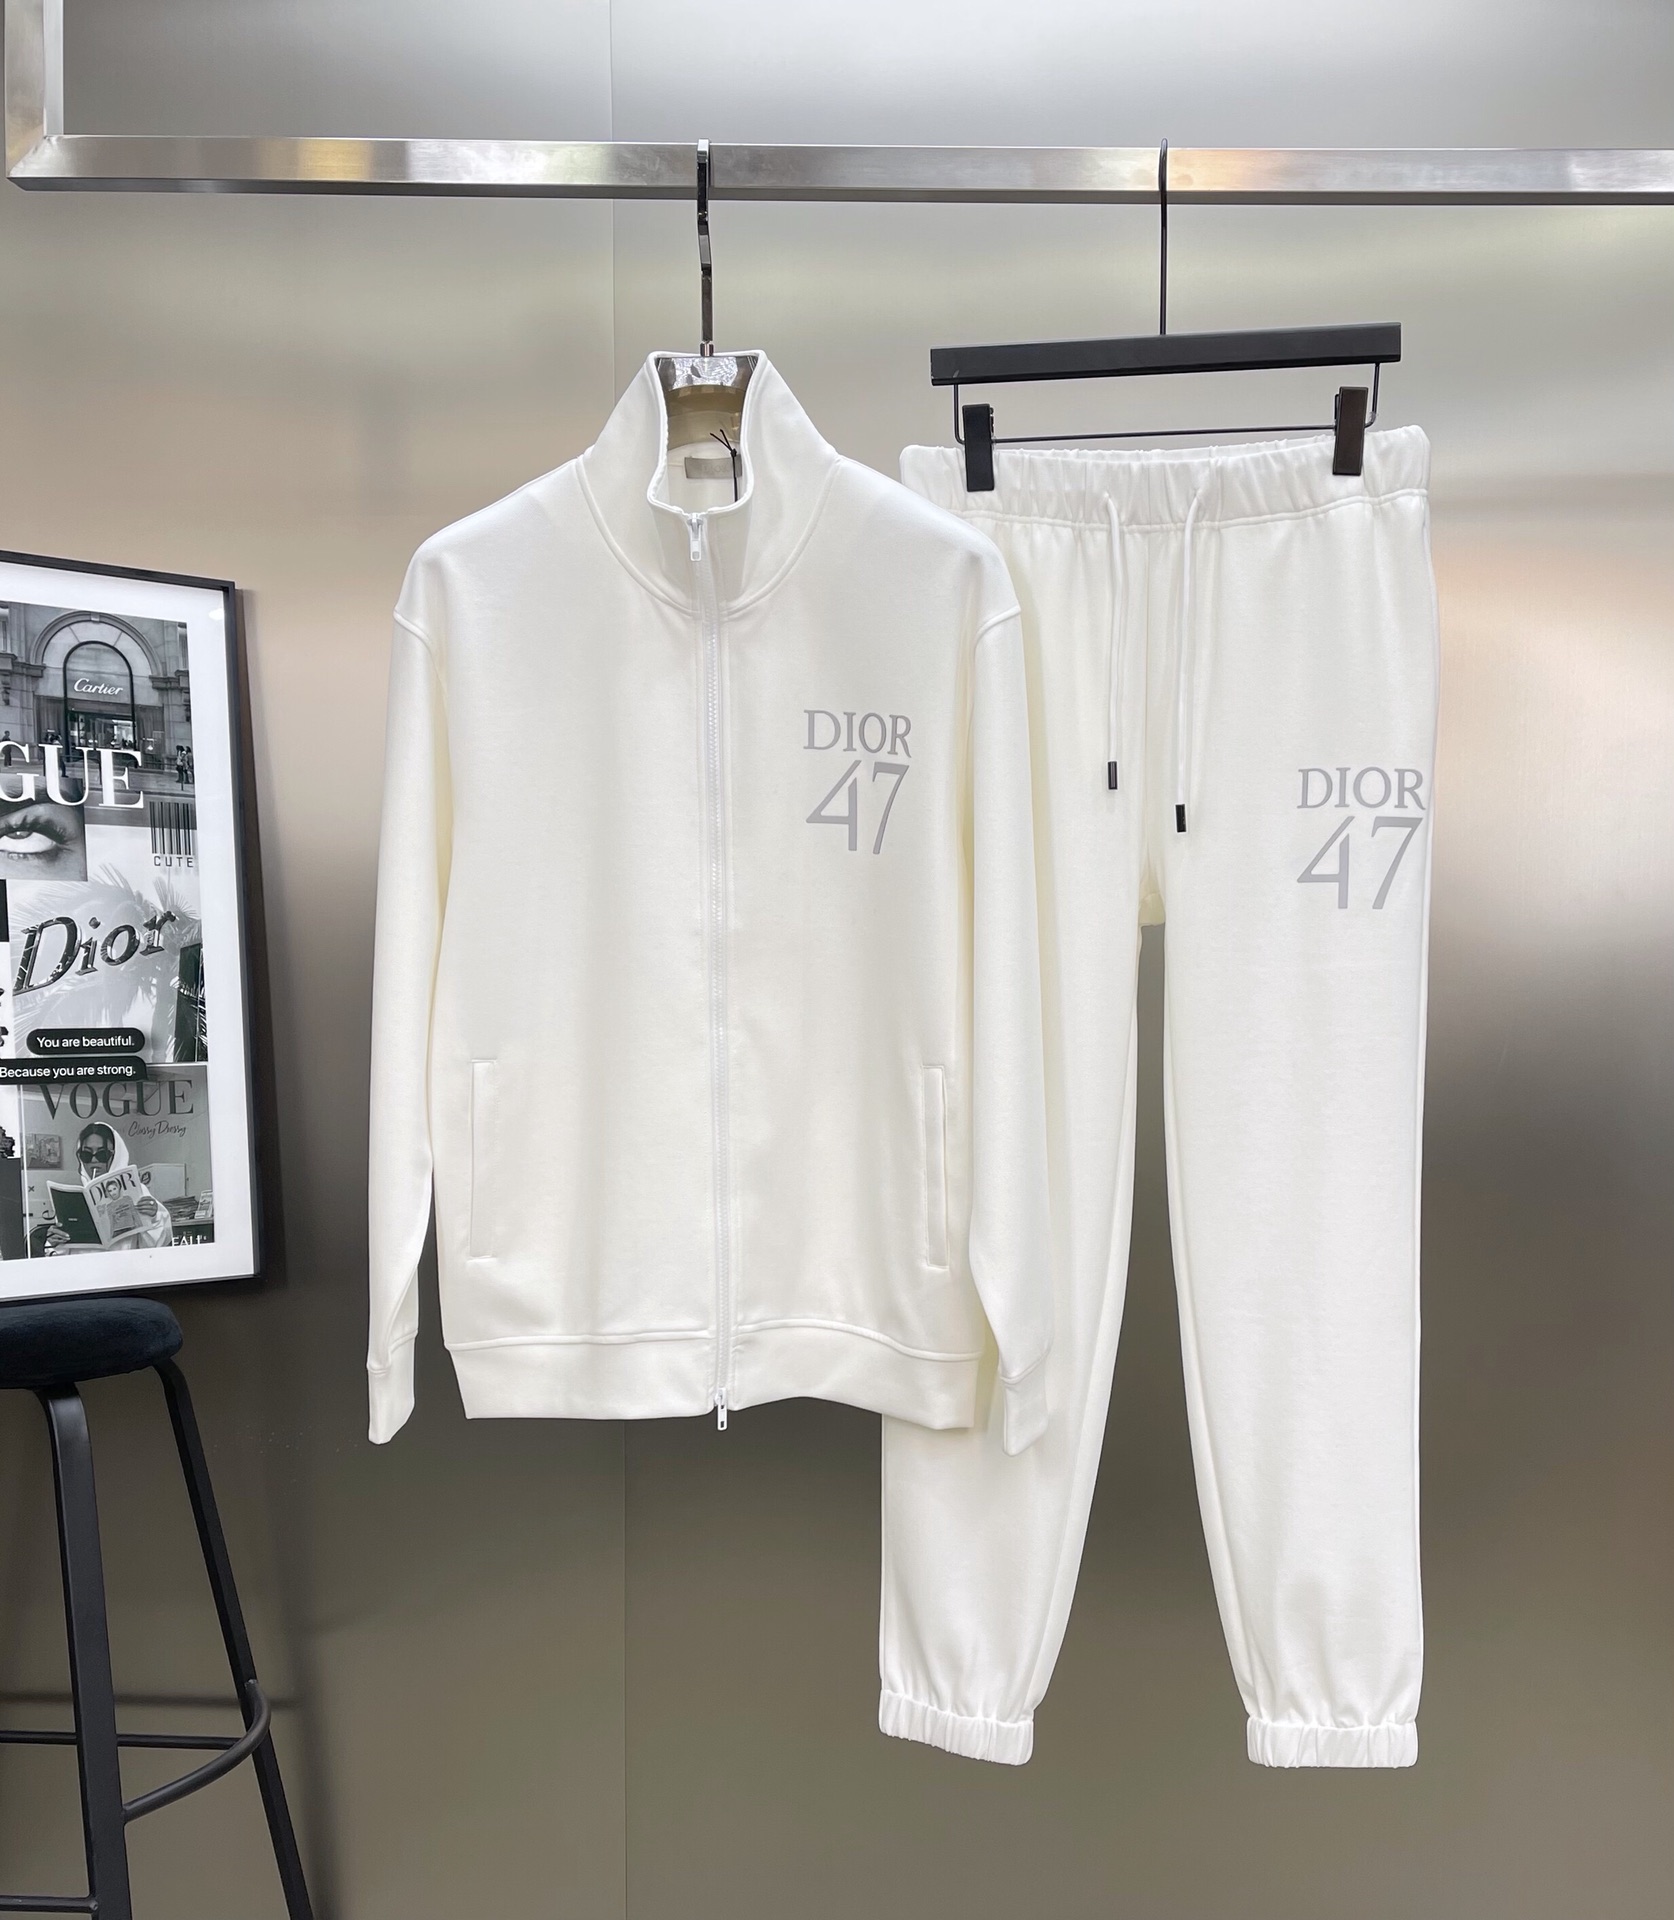 Dior Clothing Shirts & Blouses Two Piece Outfits & Matching Sets Black Coffee Color White Printing Cotton Spring Collection Fashion Sweatpants